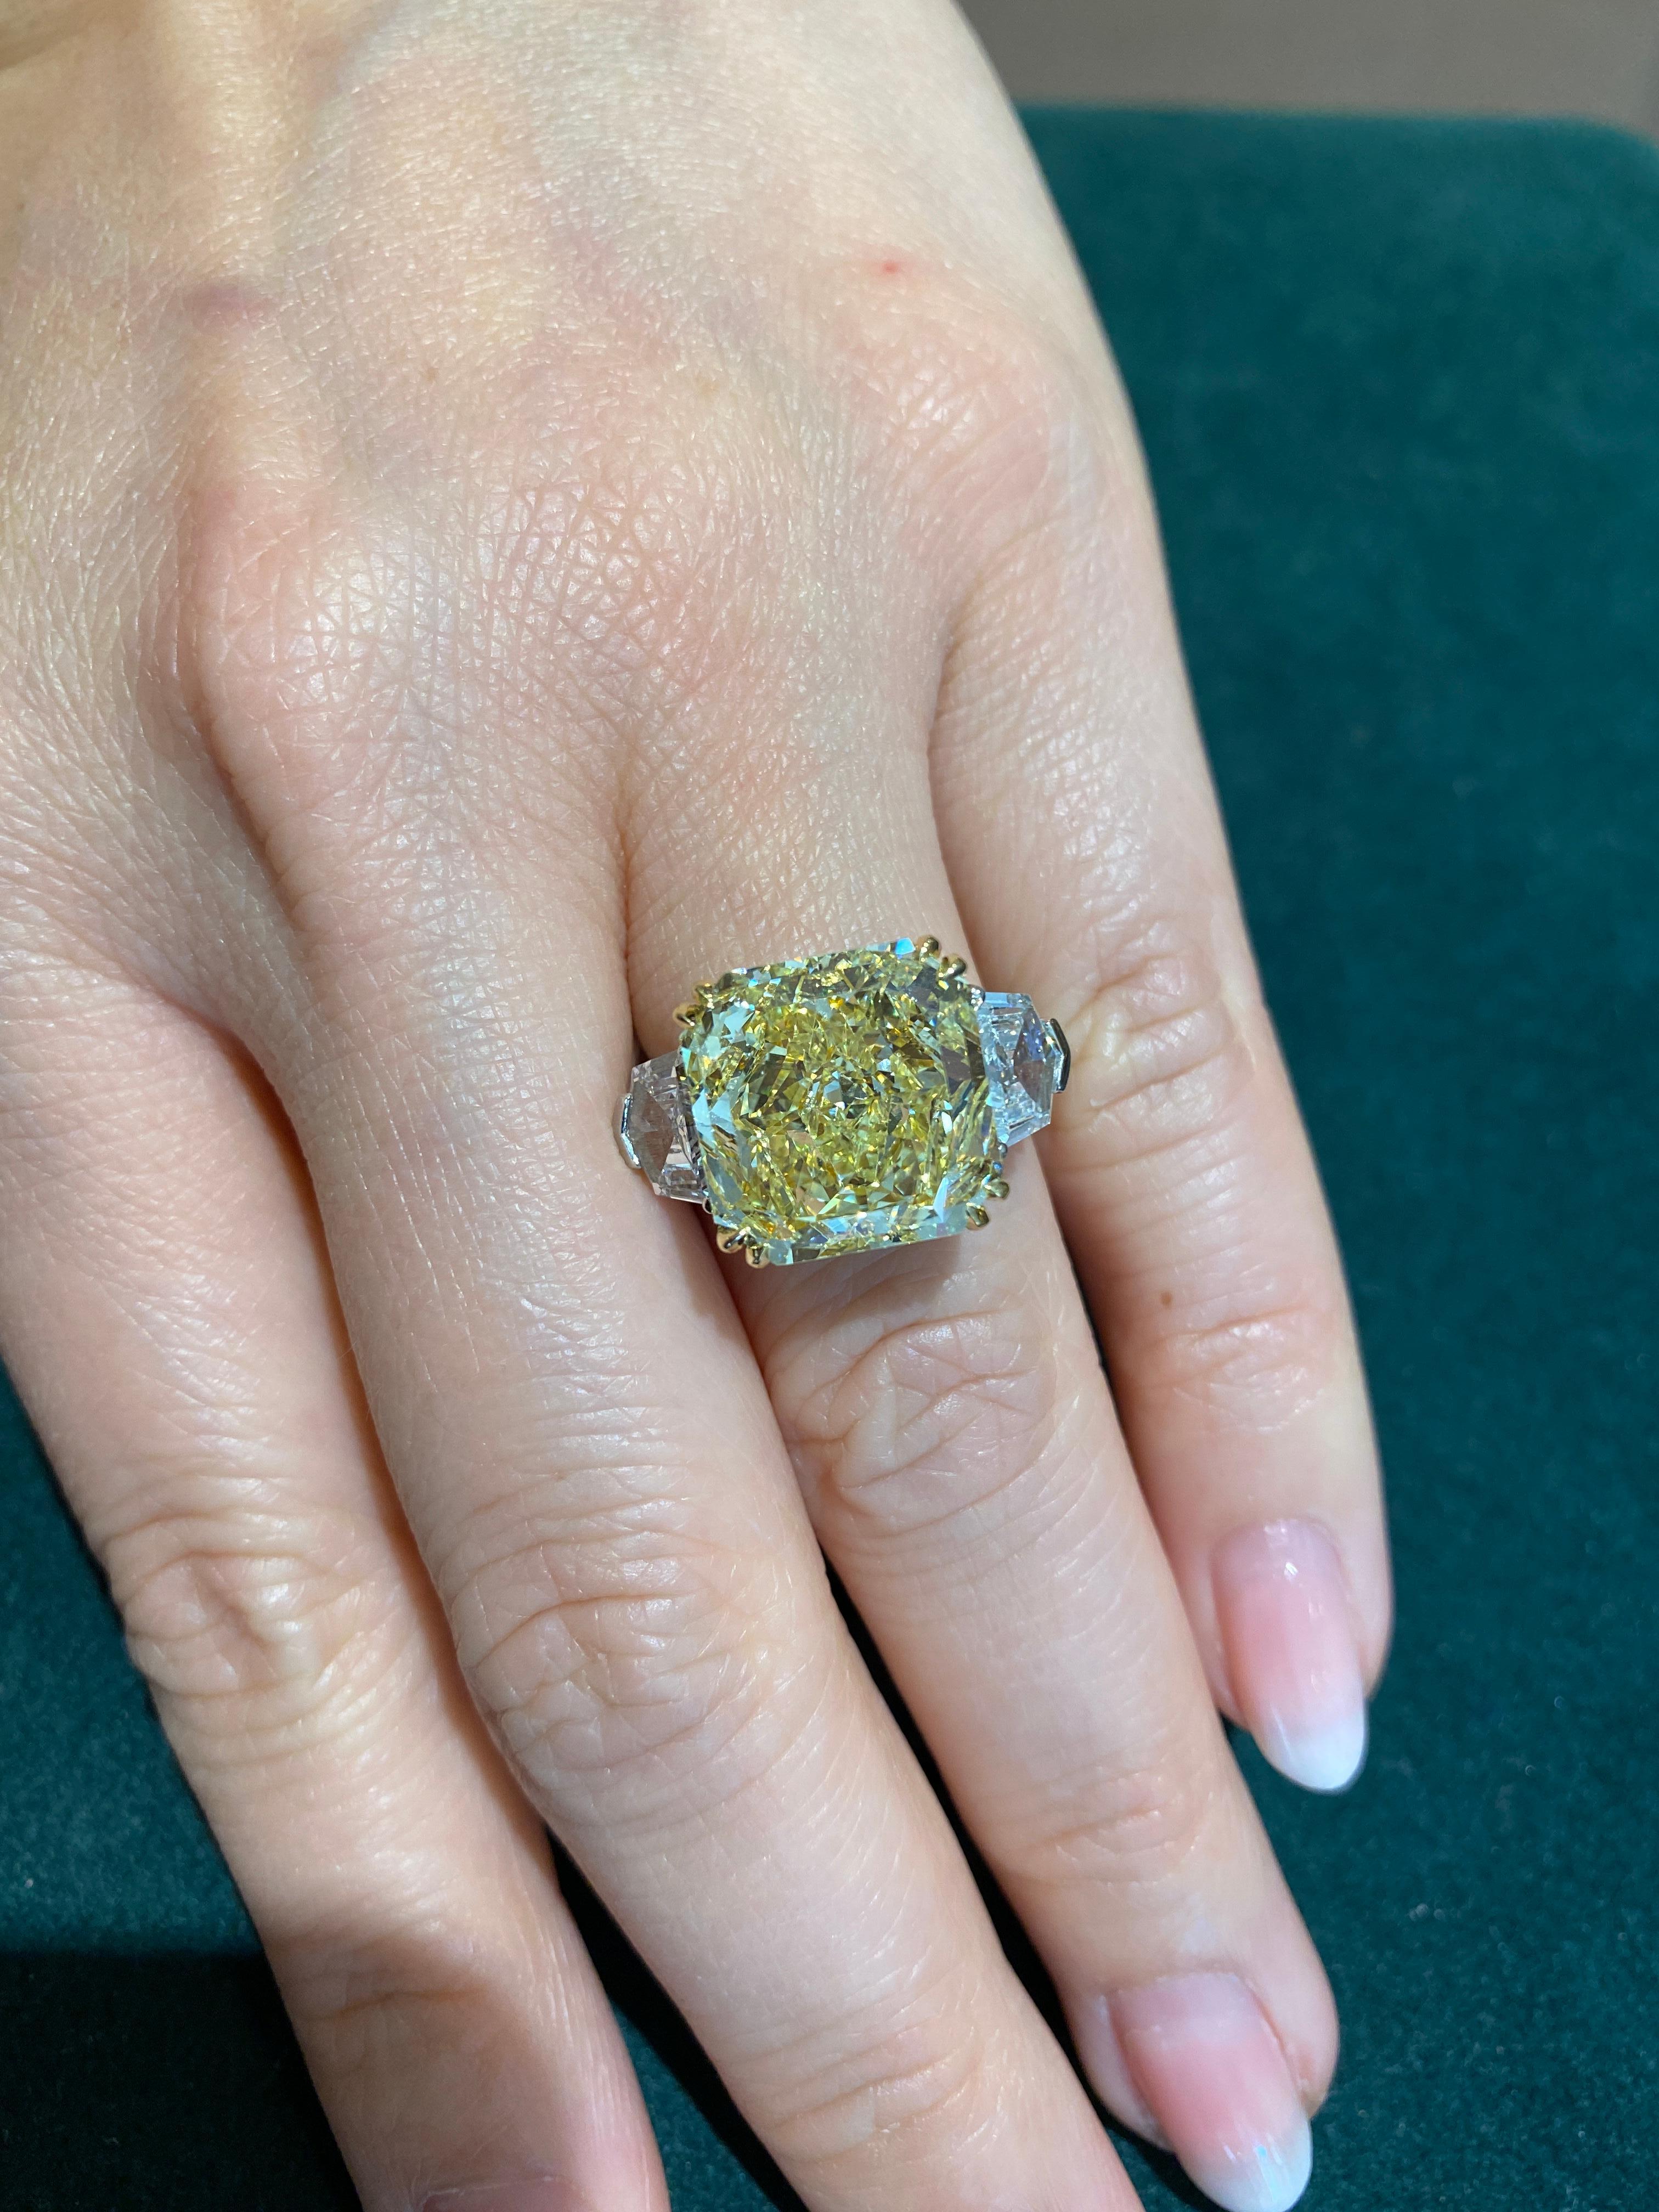 GIA Certified 10.69 ct Fancy Yellow VVS2 Radiant Diamond Ring in Platinum/18KYG In Excellent Condition For Sale In La Jolla, CA